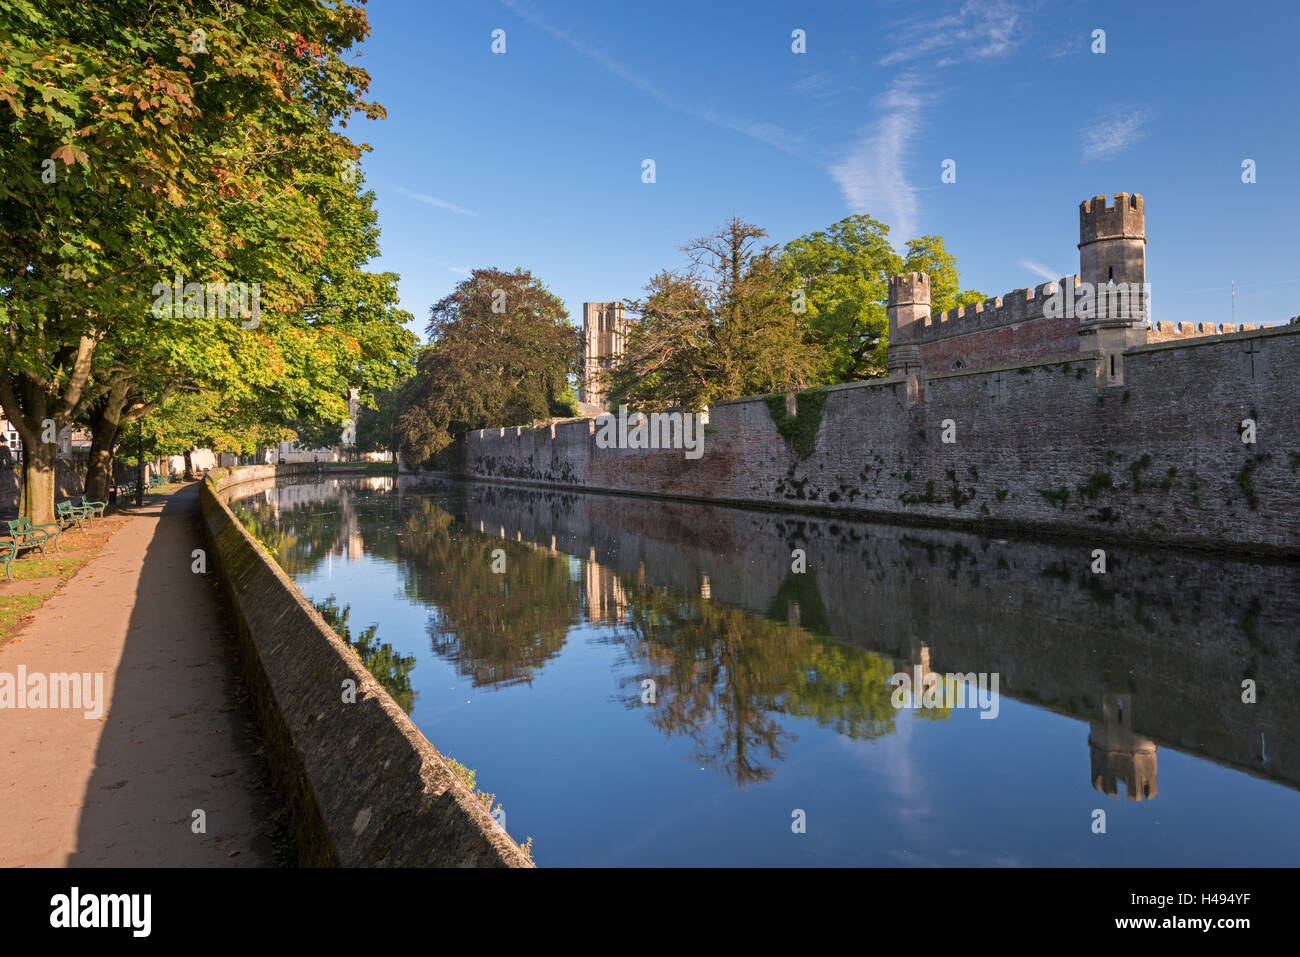 The Bishop's Palace and moat in the cathedral city of Wells, Somerset, England. Autumn (September) 2013. Stock Photo